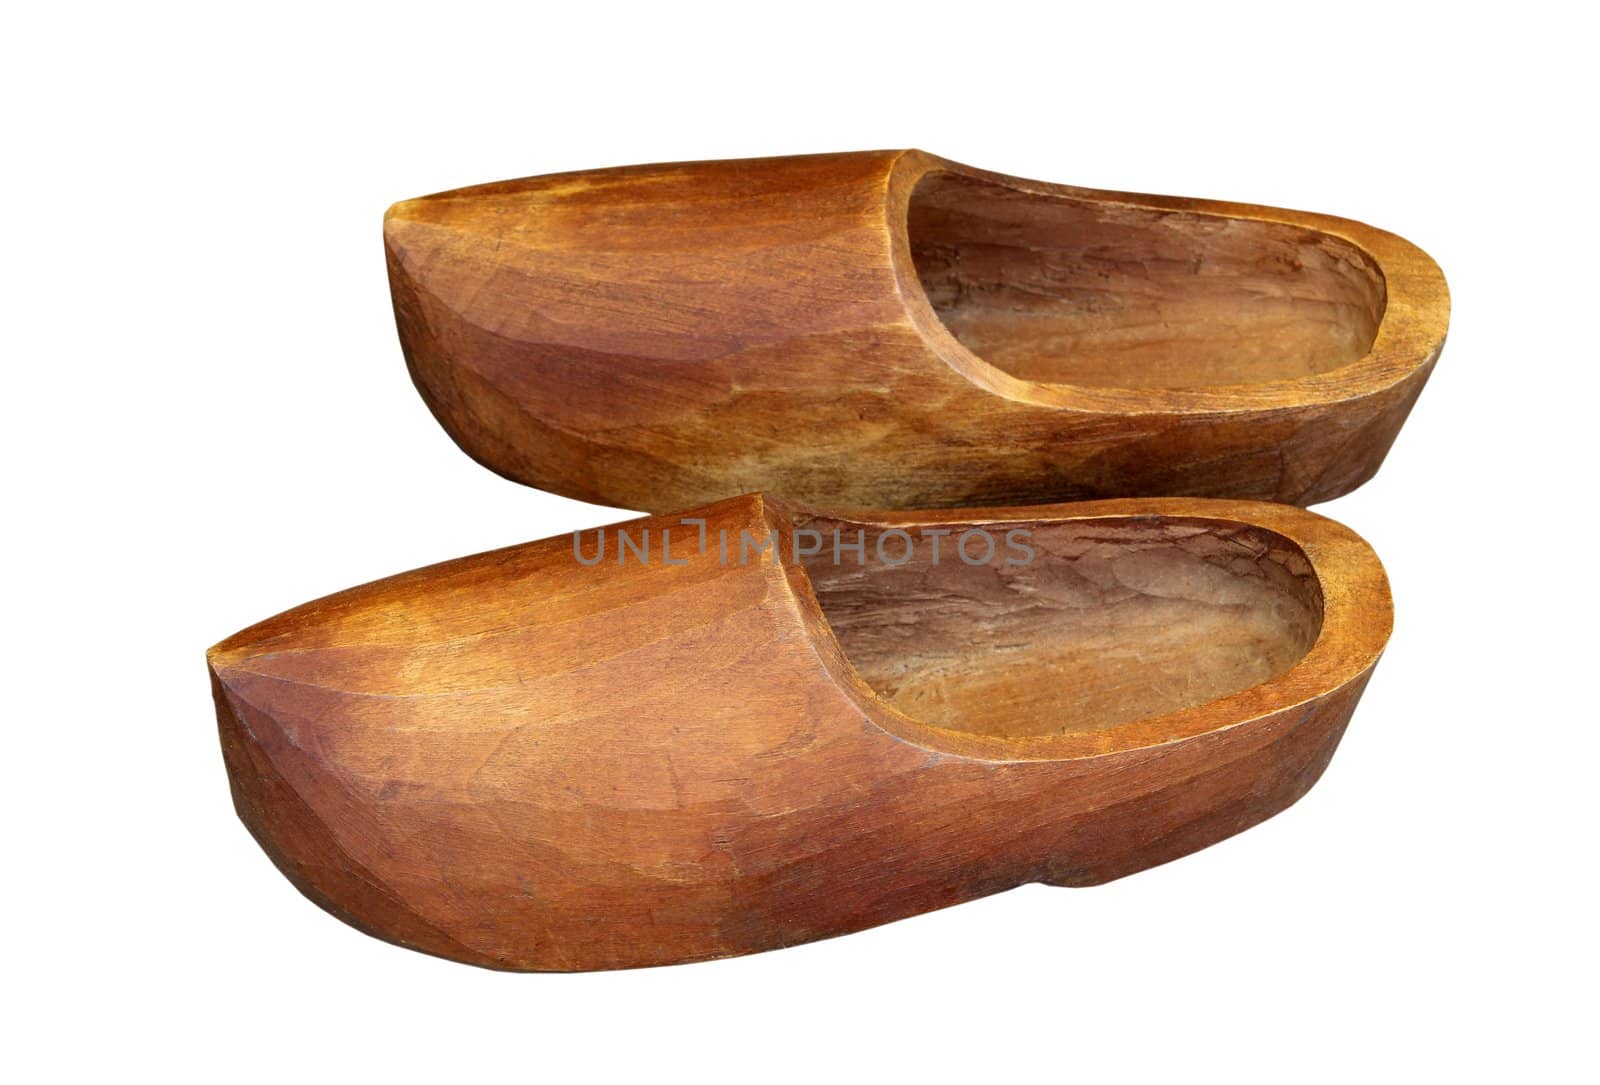 A pair of carved wooden shoes Folklore